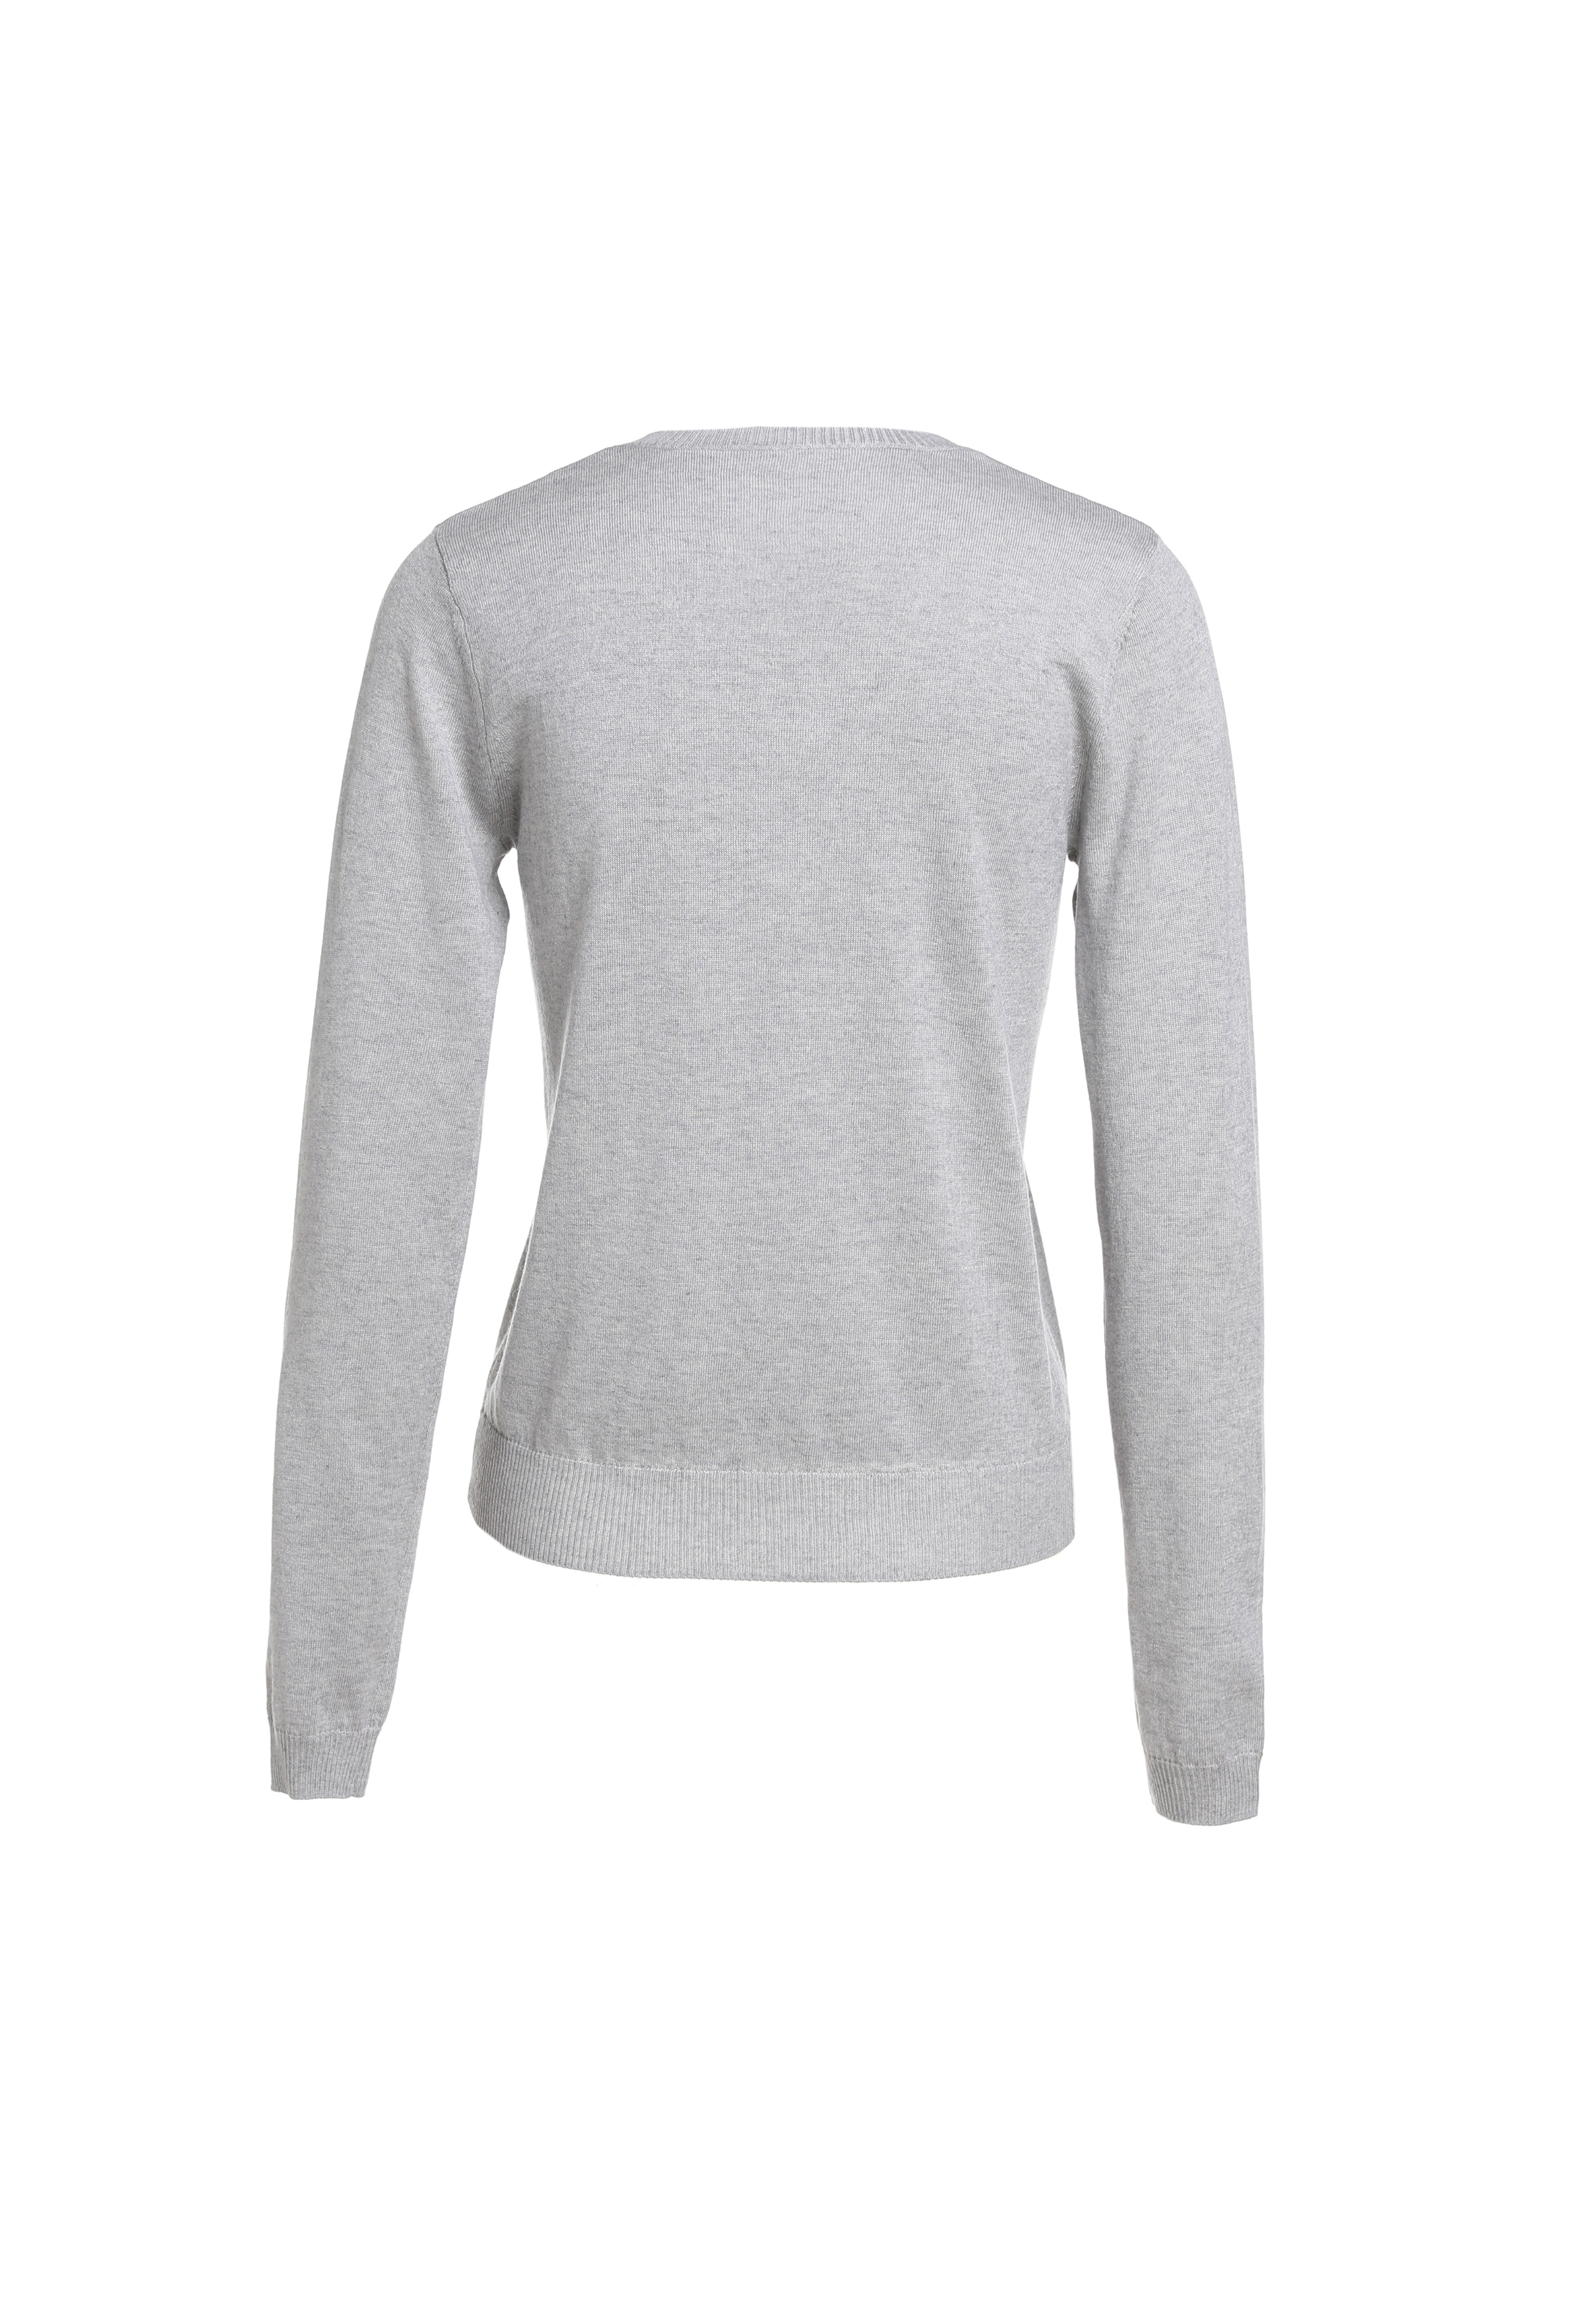 Women's Sweater/ Cashmere/ V-Neck Long Sleeves